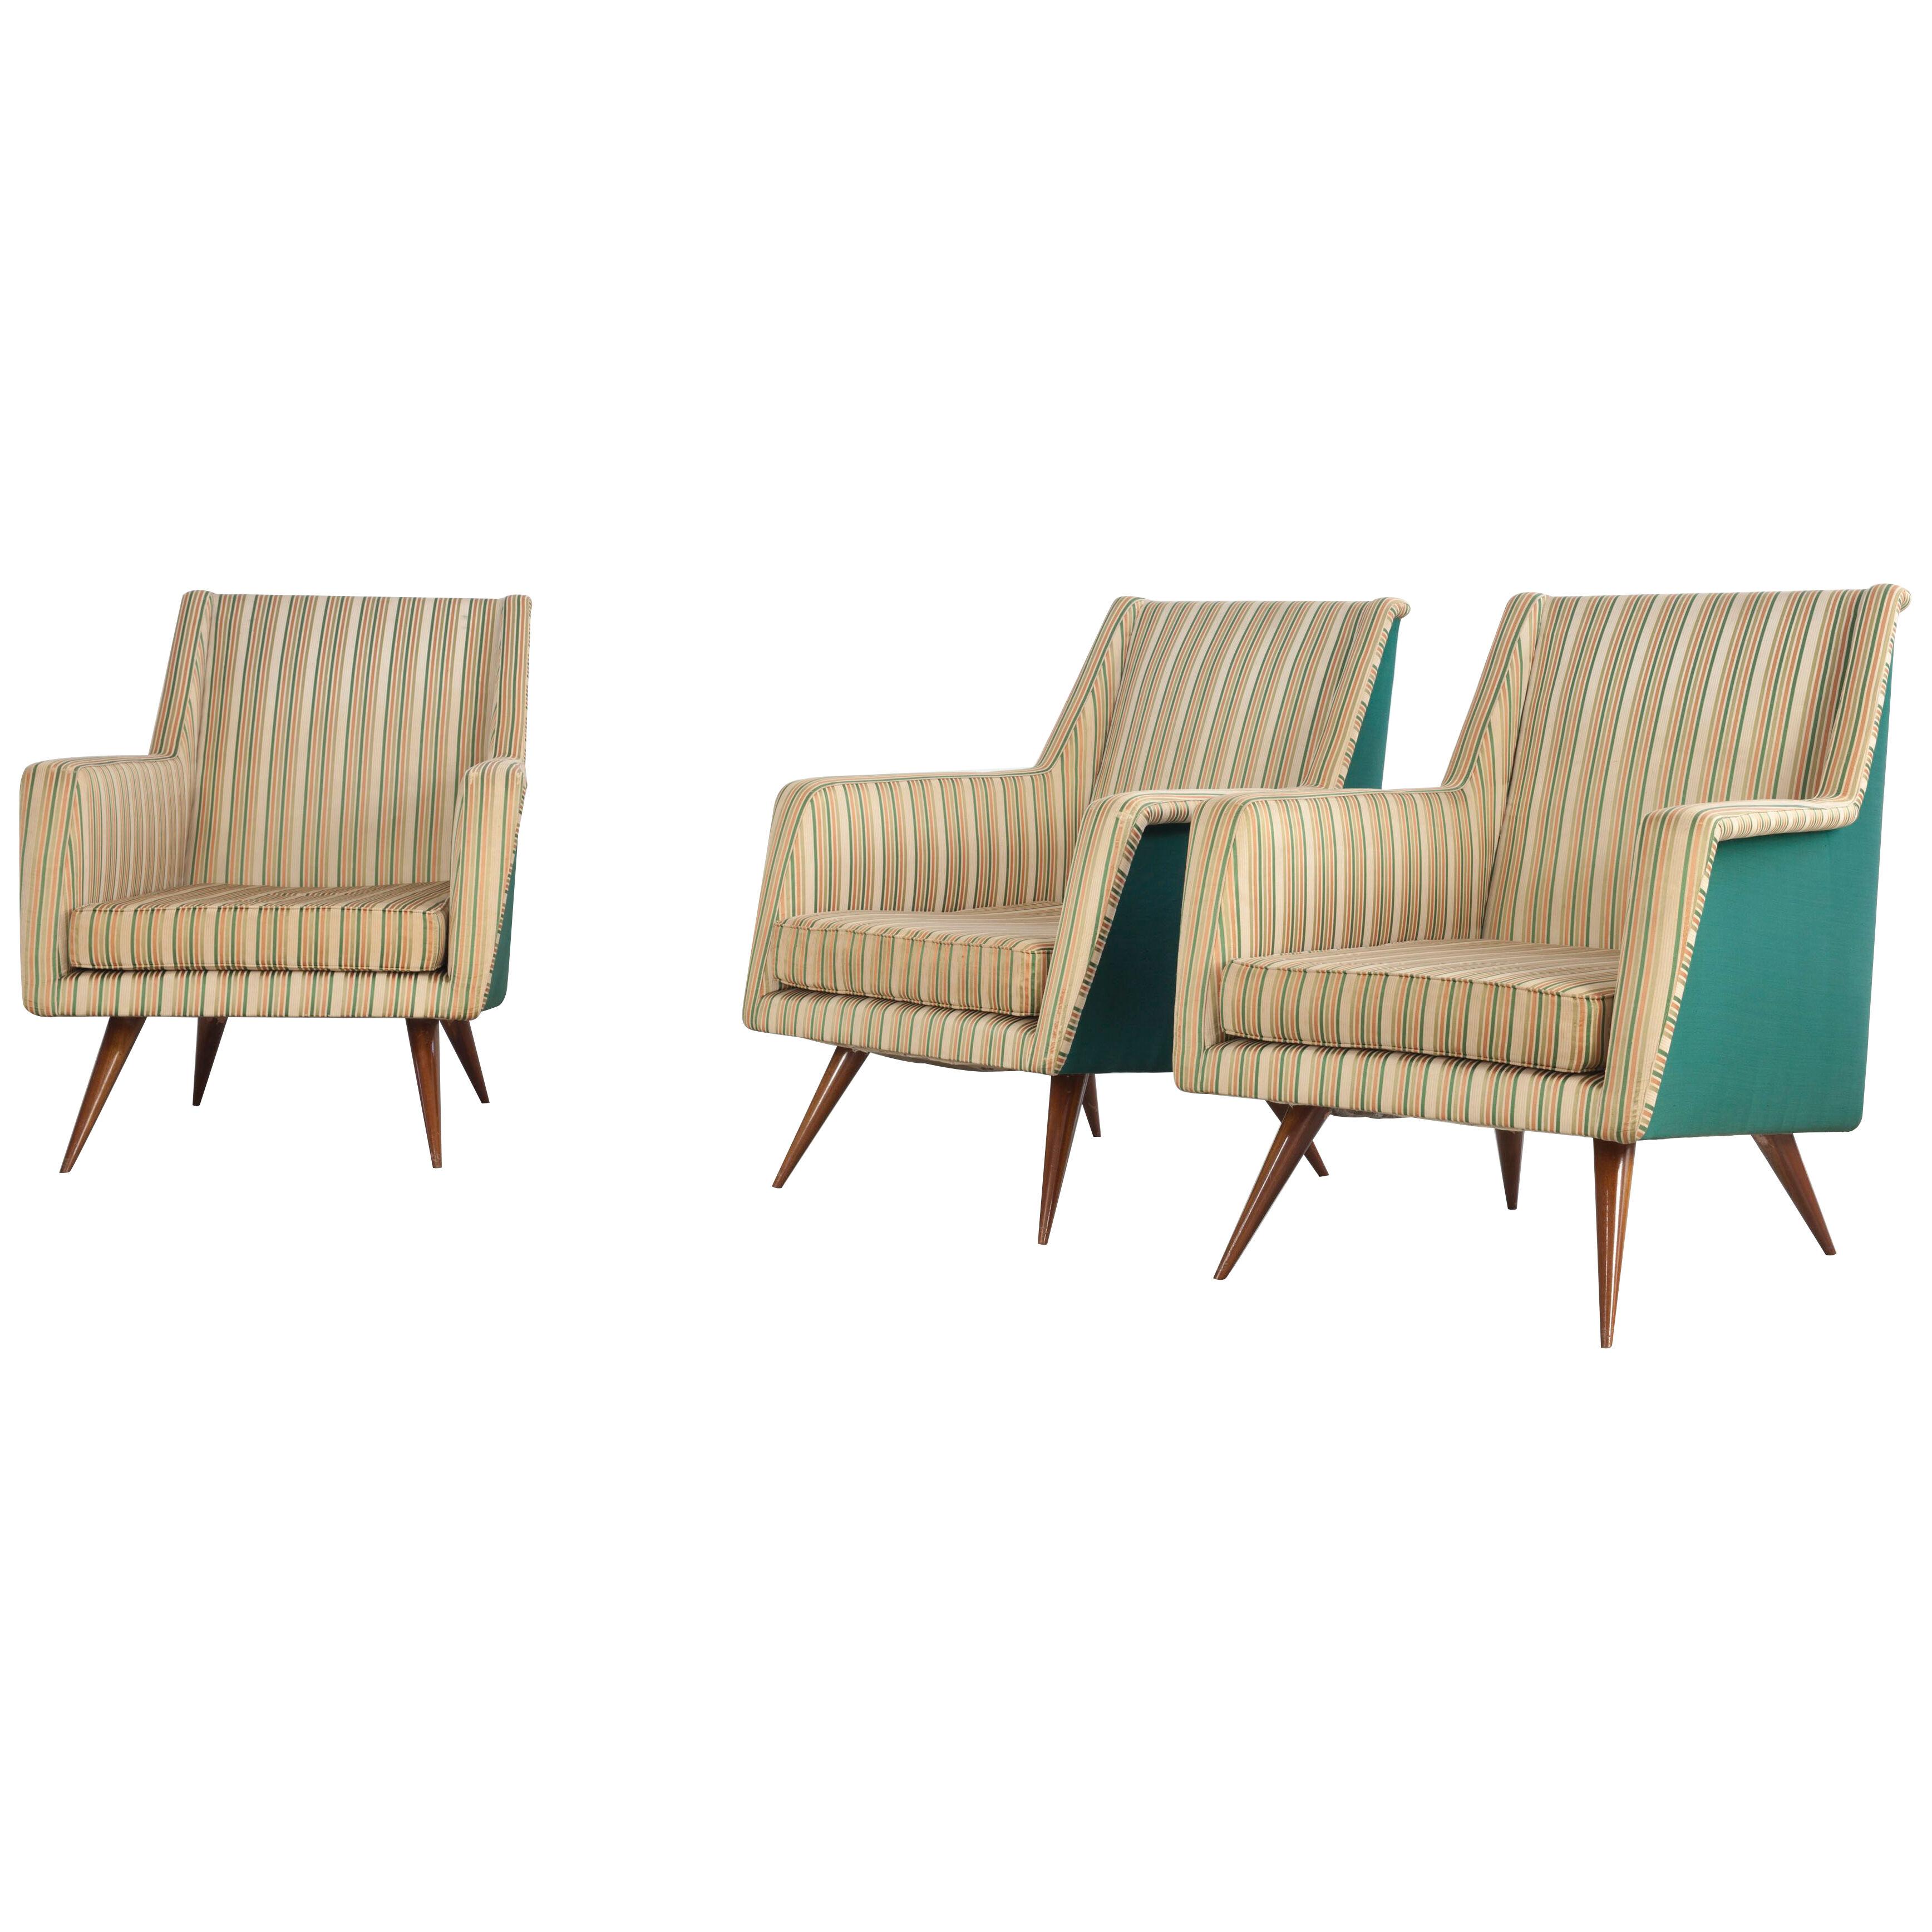 Set of Three Armchairs of the 1950s, Attributed to Melchiorre Bega